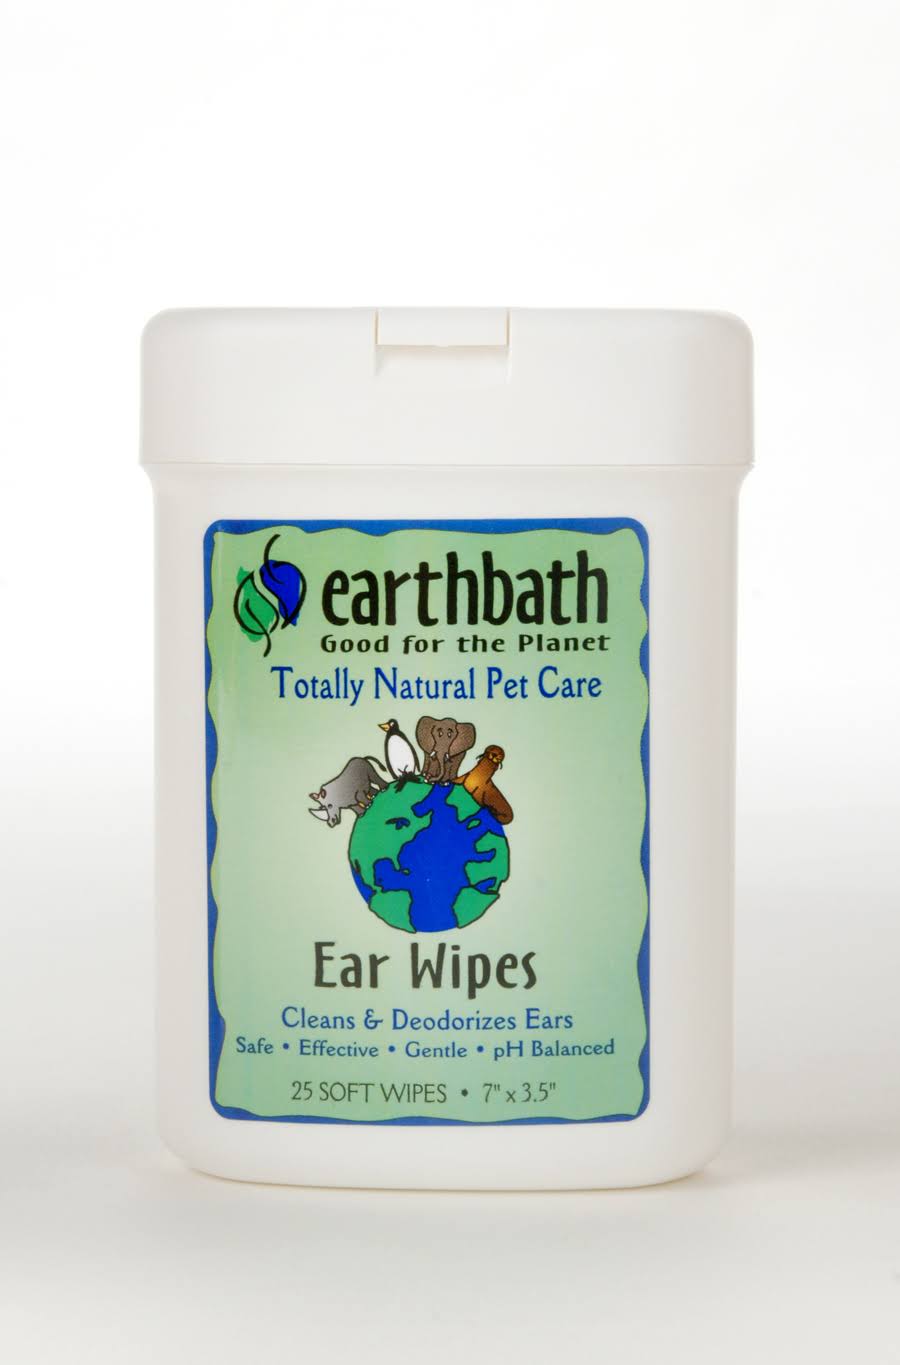 Earthbath All Natural Specialty Pet Ear Wipes - 25 Wipes